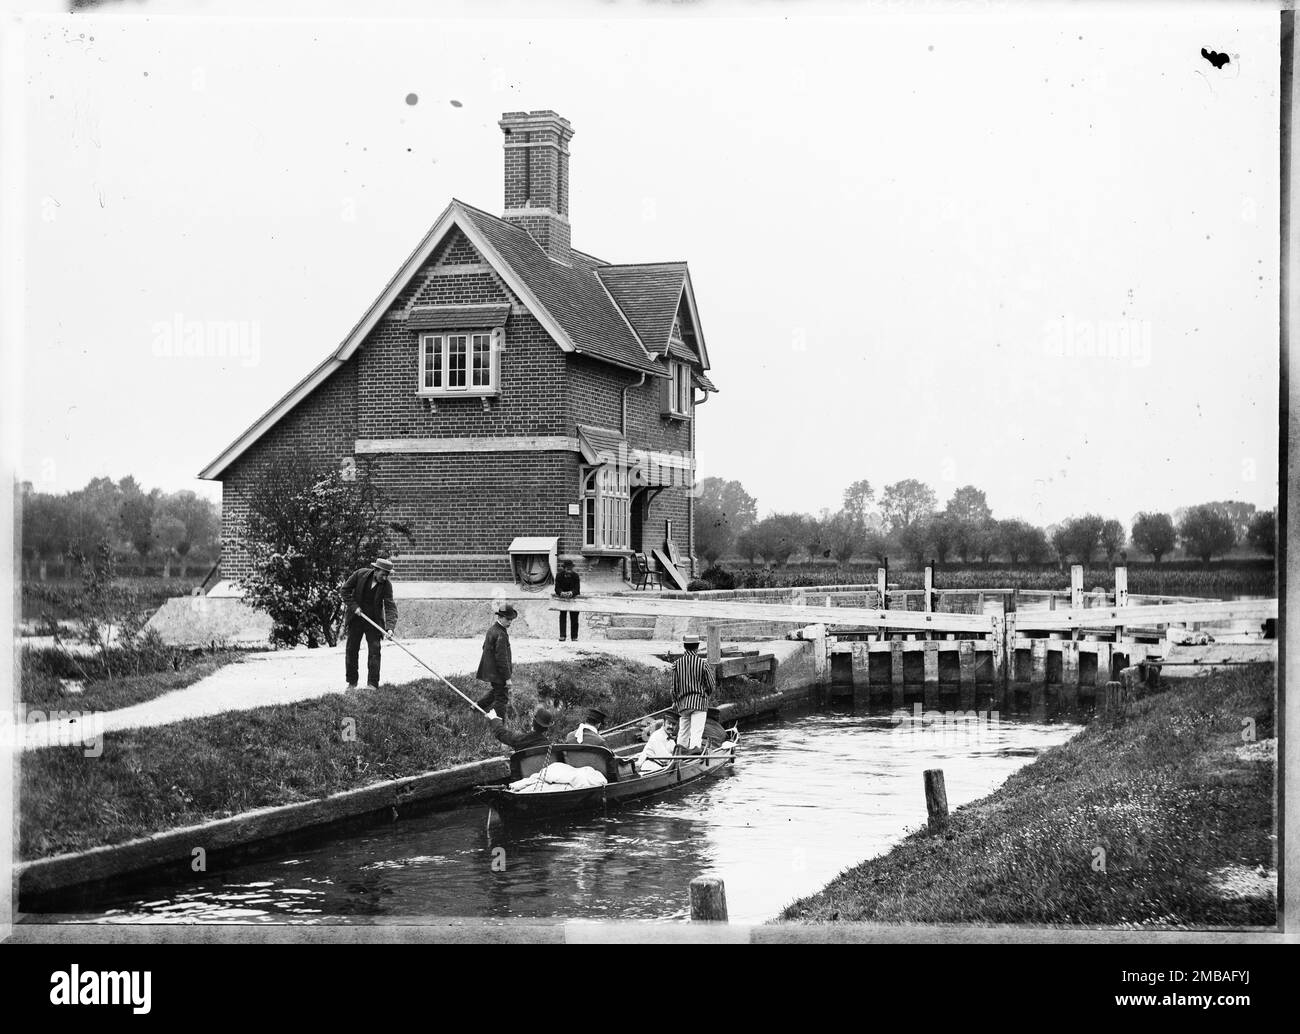 Lock Keeper's House, Goring, Goring-on-Thames, South Oxfordshire, 1885. The Lock Keeper's House and Goring Lock viewed from the south east with a Thames skiff in the lock in the foreground. Stock Photo